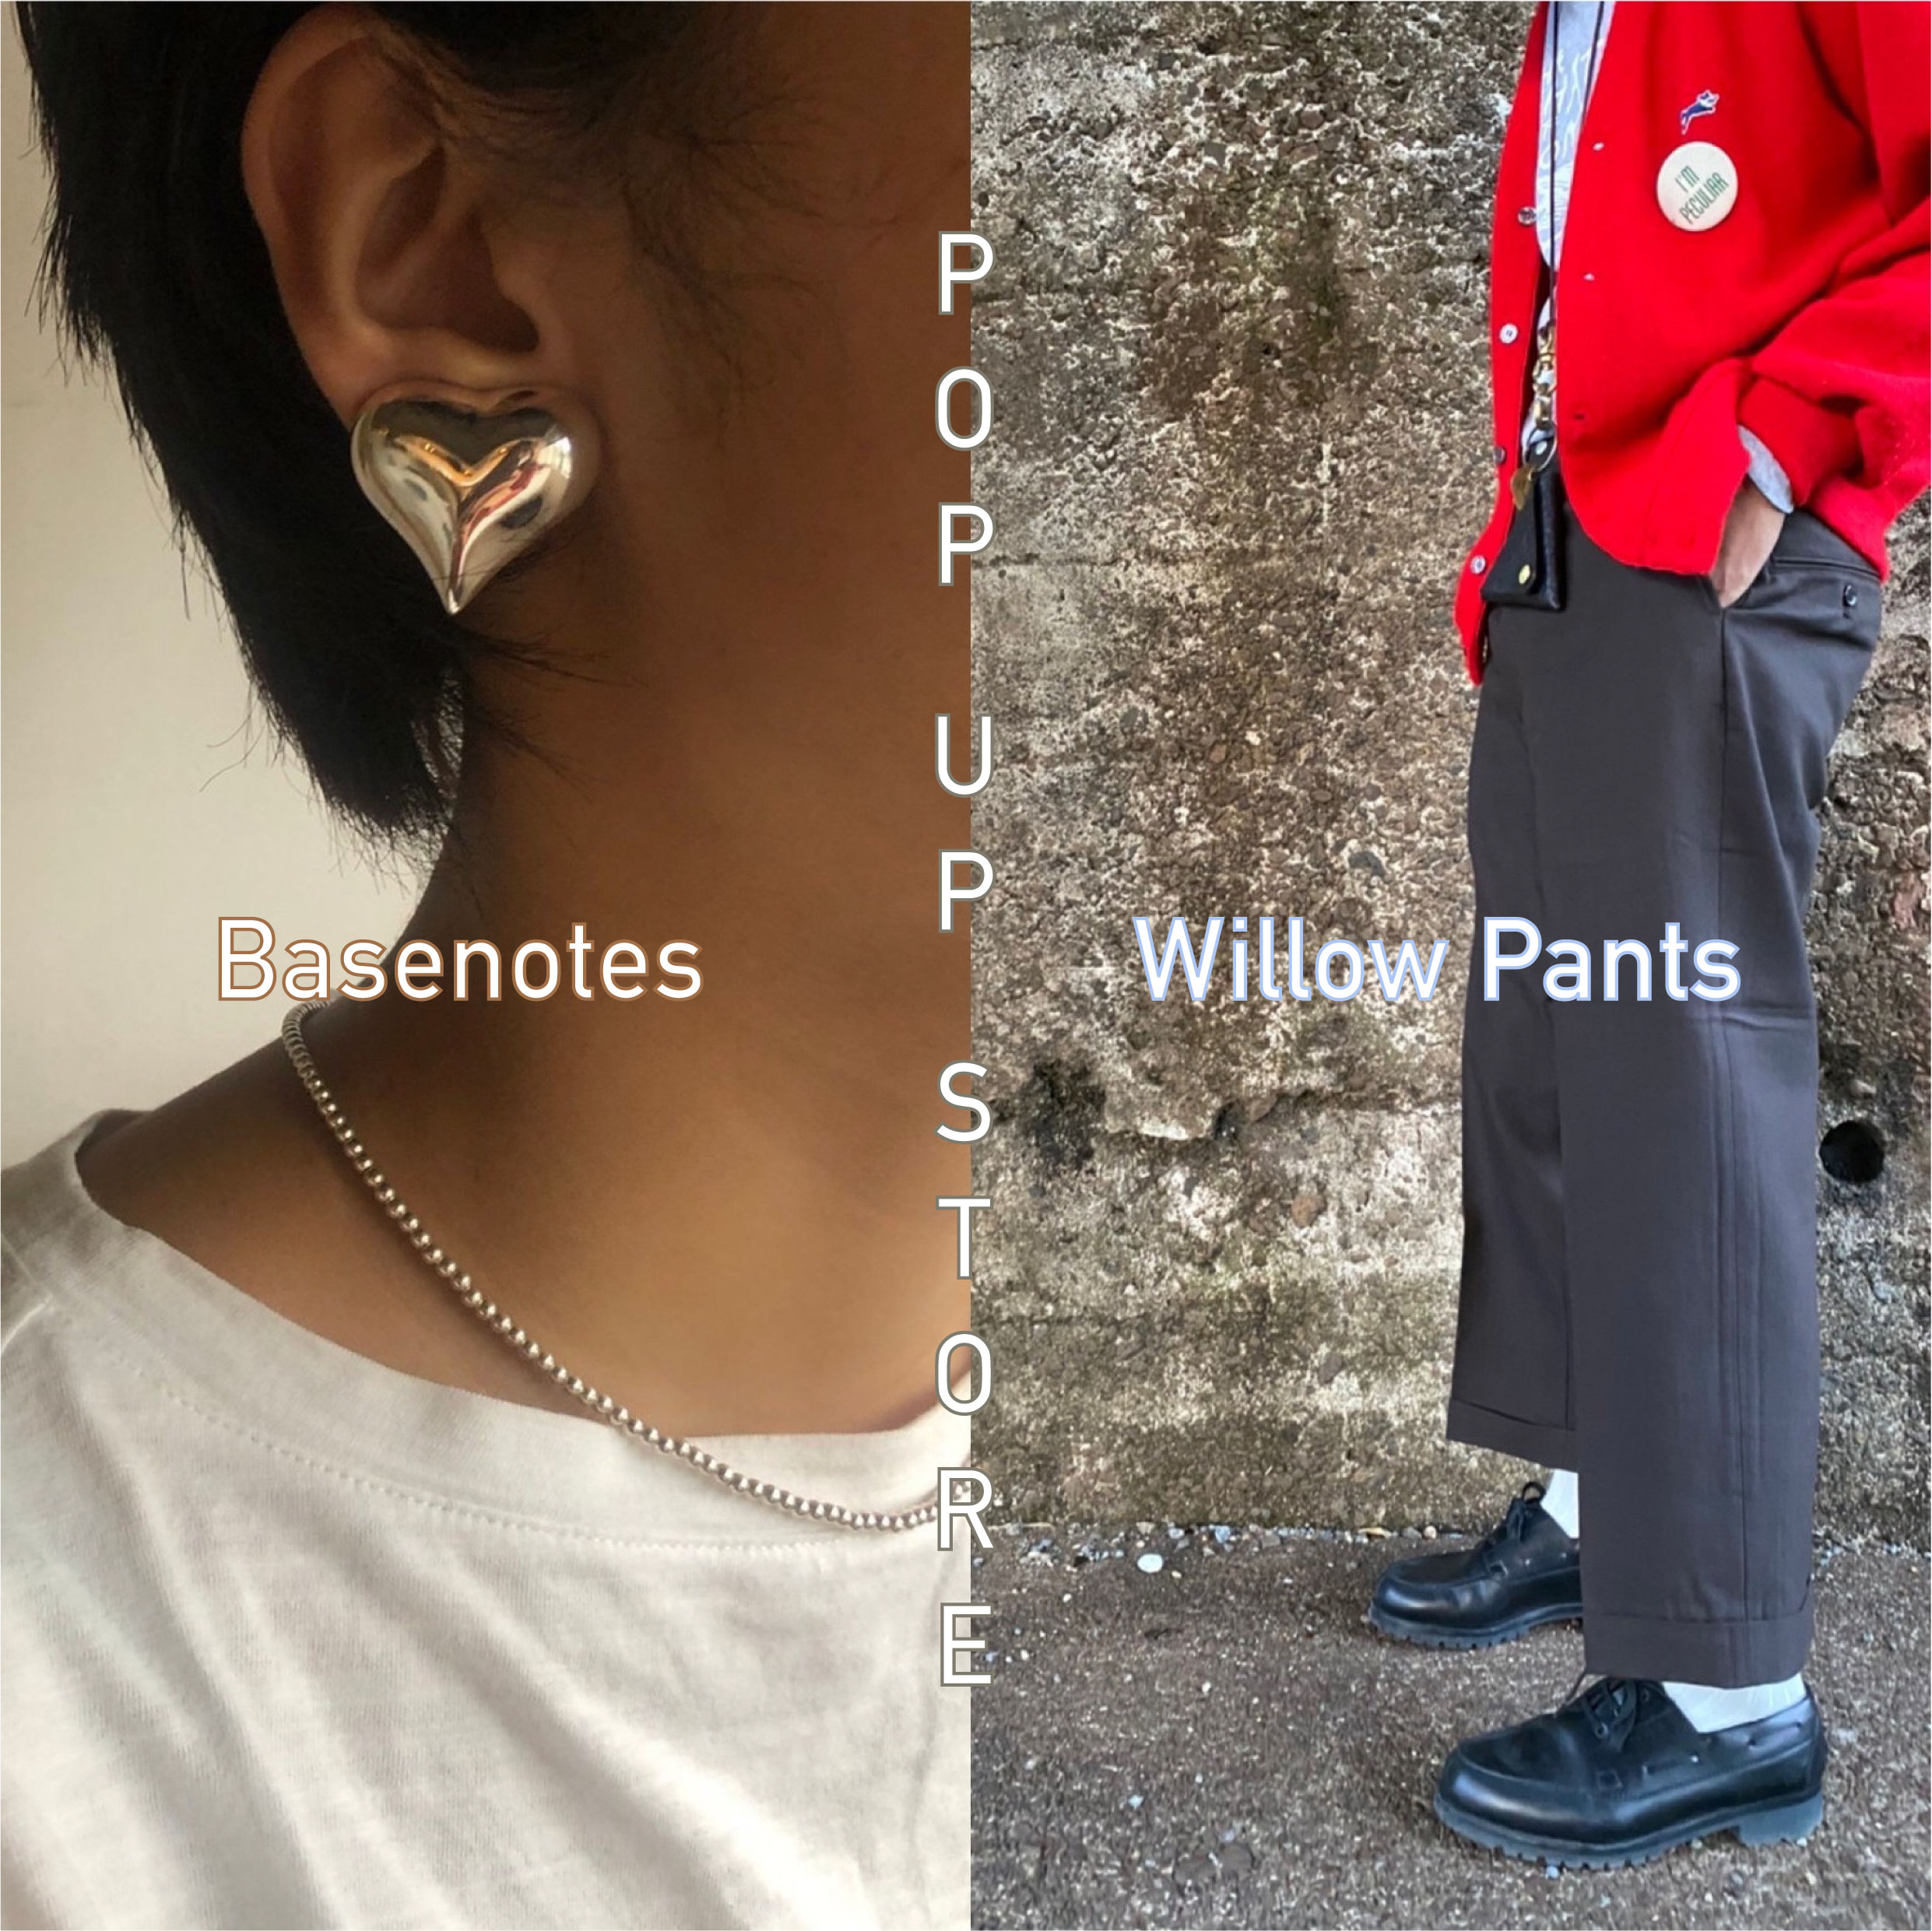 Pop up store<br>Basenotes & Willow Pants